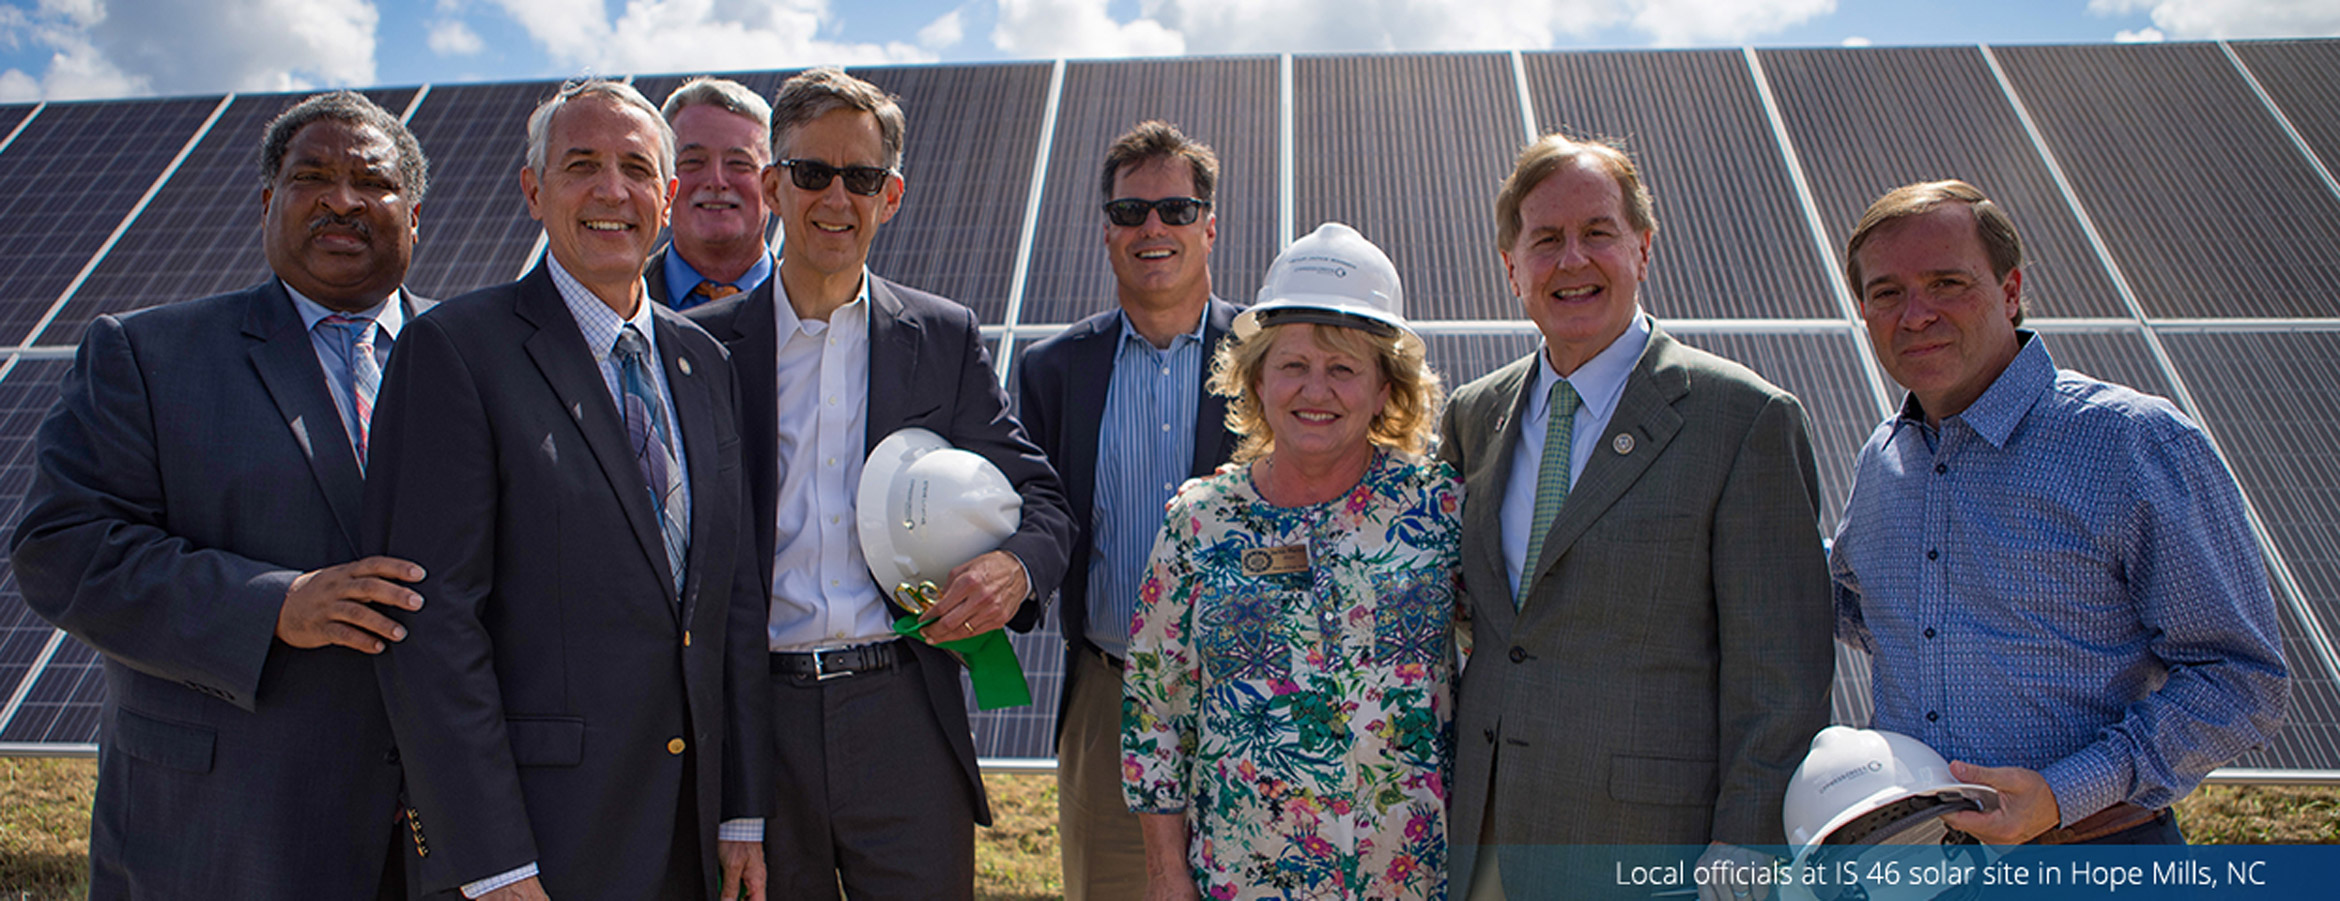 Local officials cut the ribbon on Cypress Creek's IS 46 solar site in Hope Mills, NC